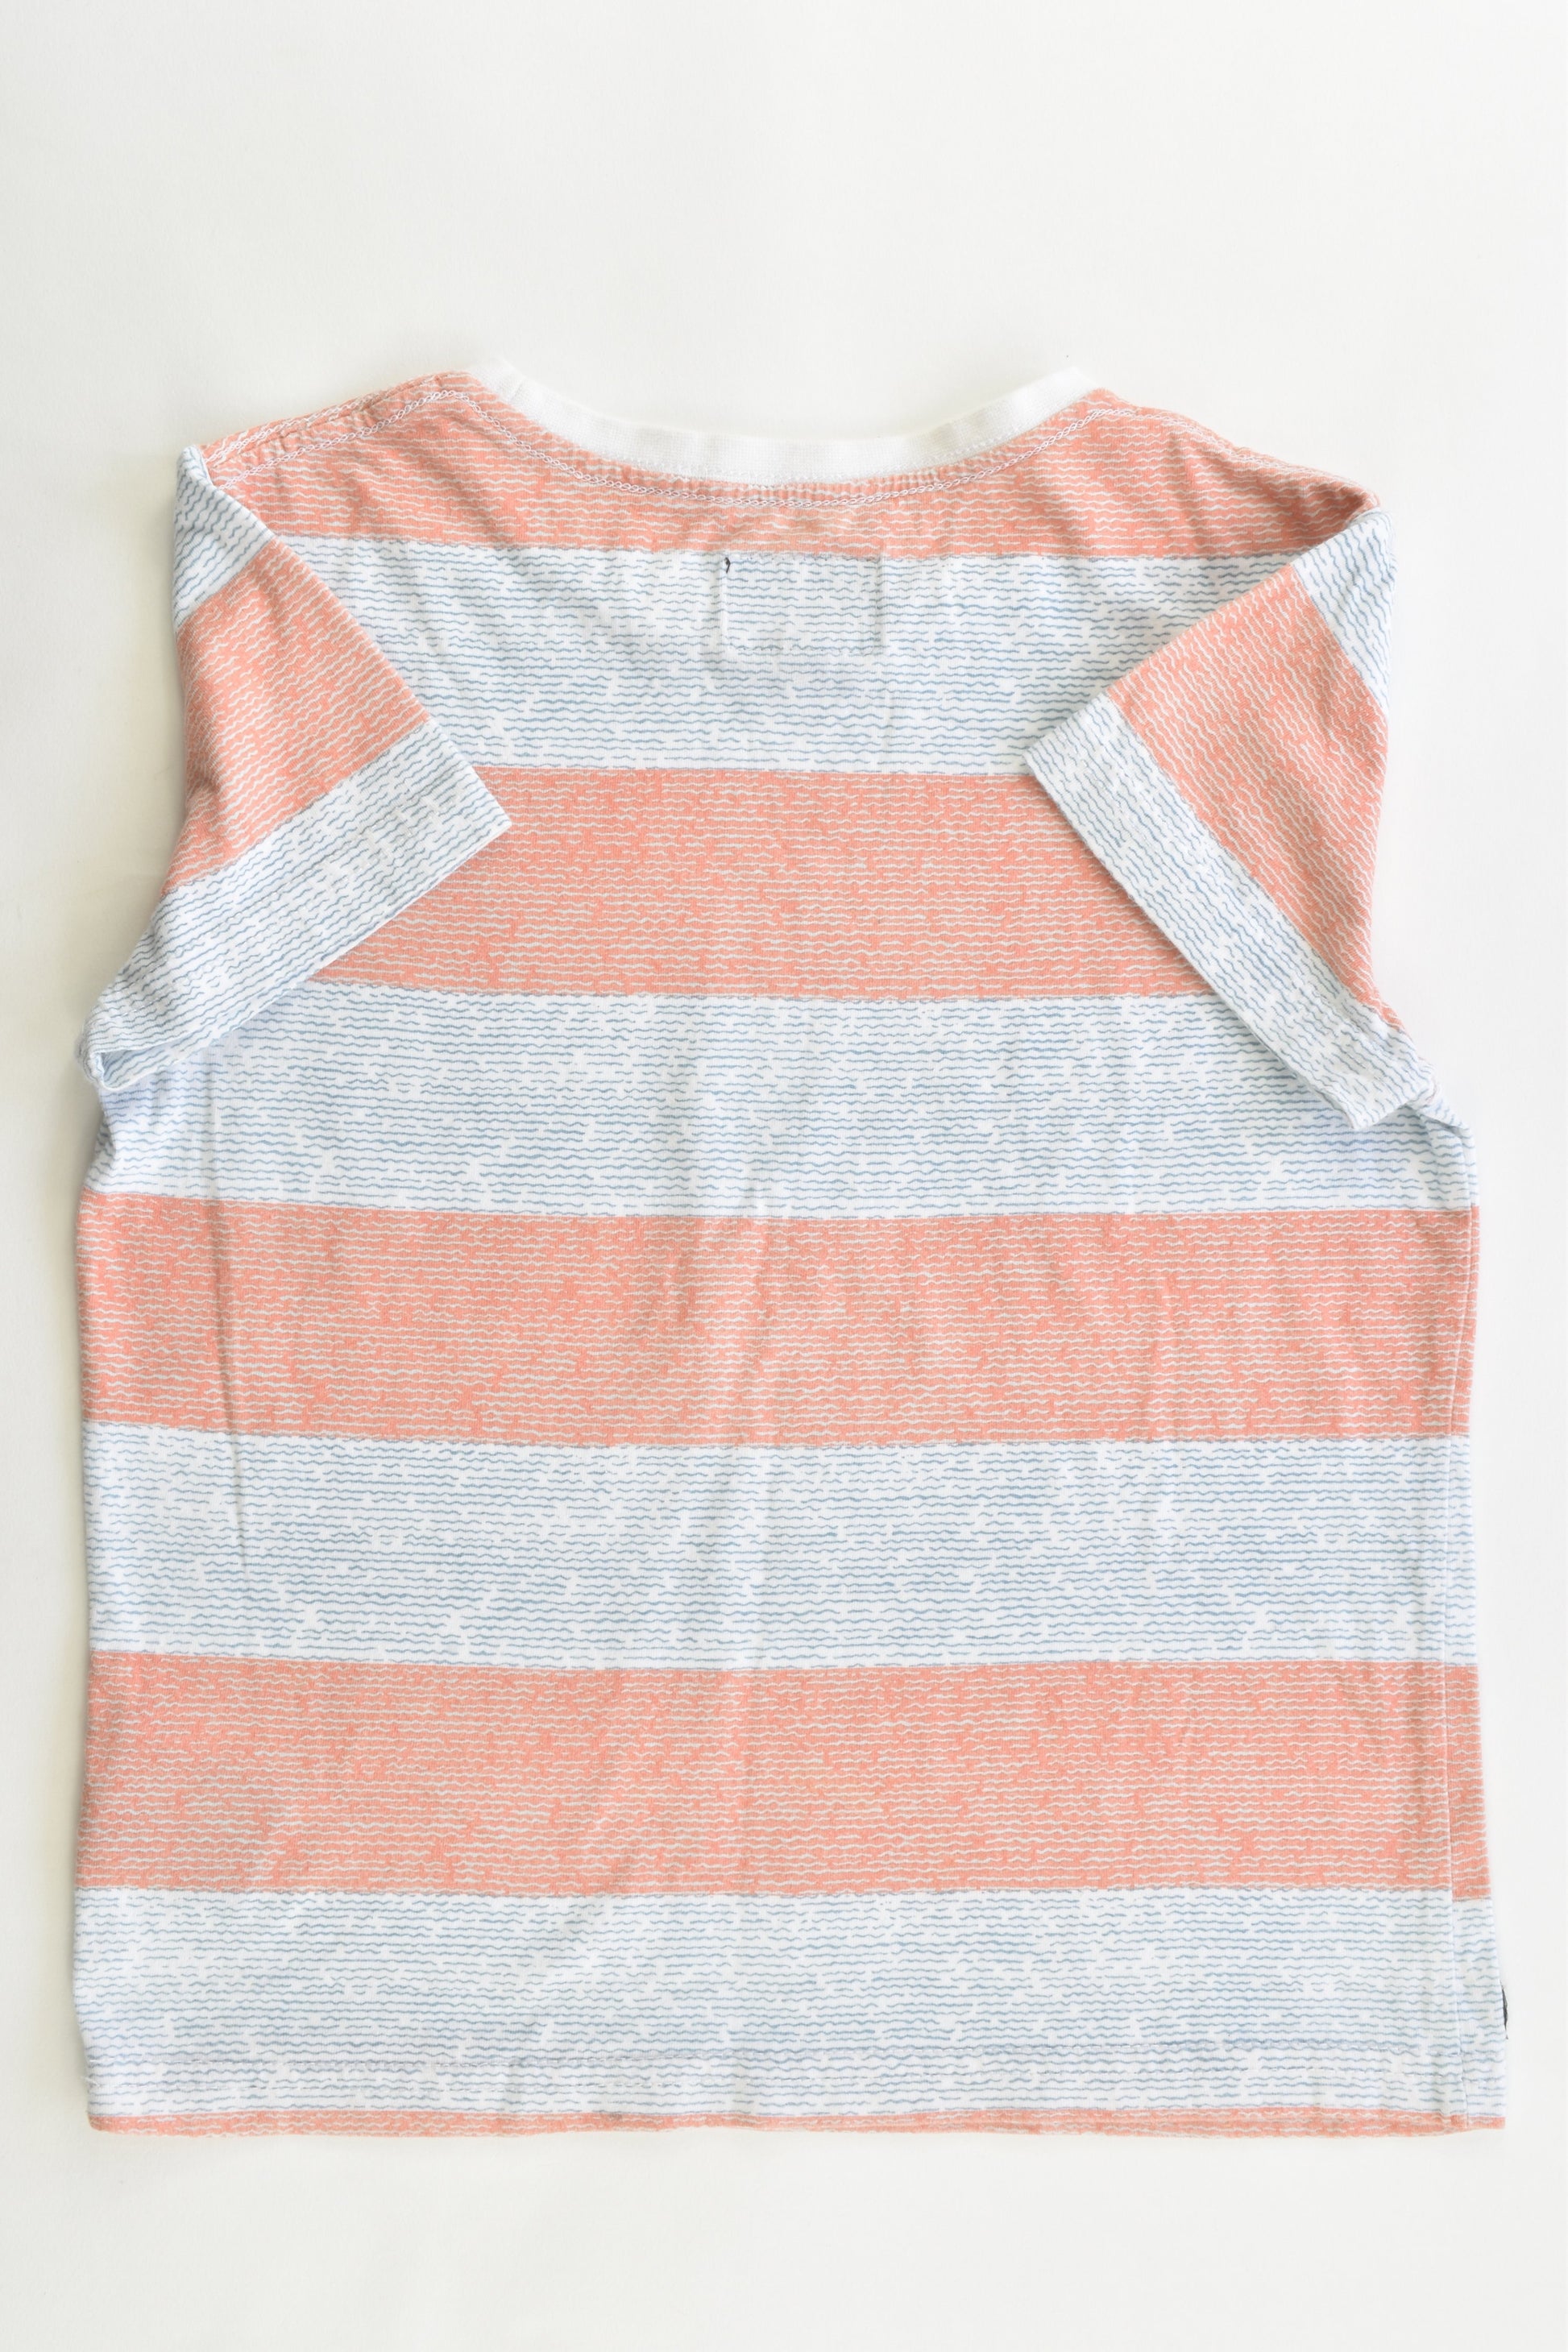 Indie & Co Size 5 T-shirt